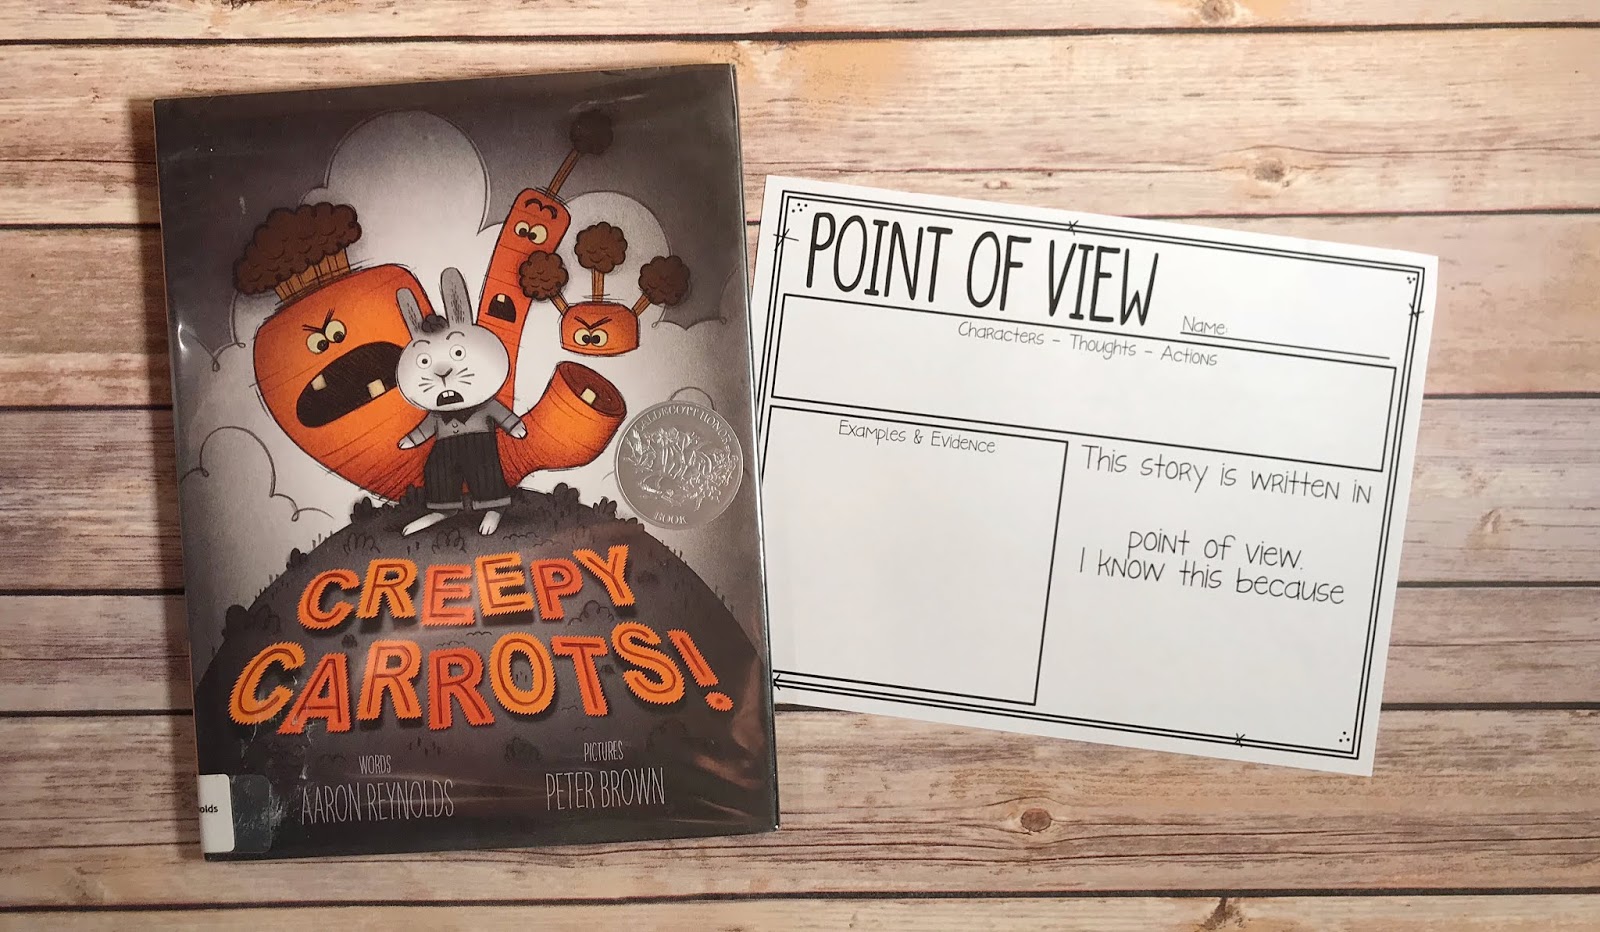 Mentor Text with text "Creepy Carrots!" and Graphic Organizer with text "Point of View"